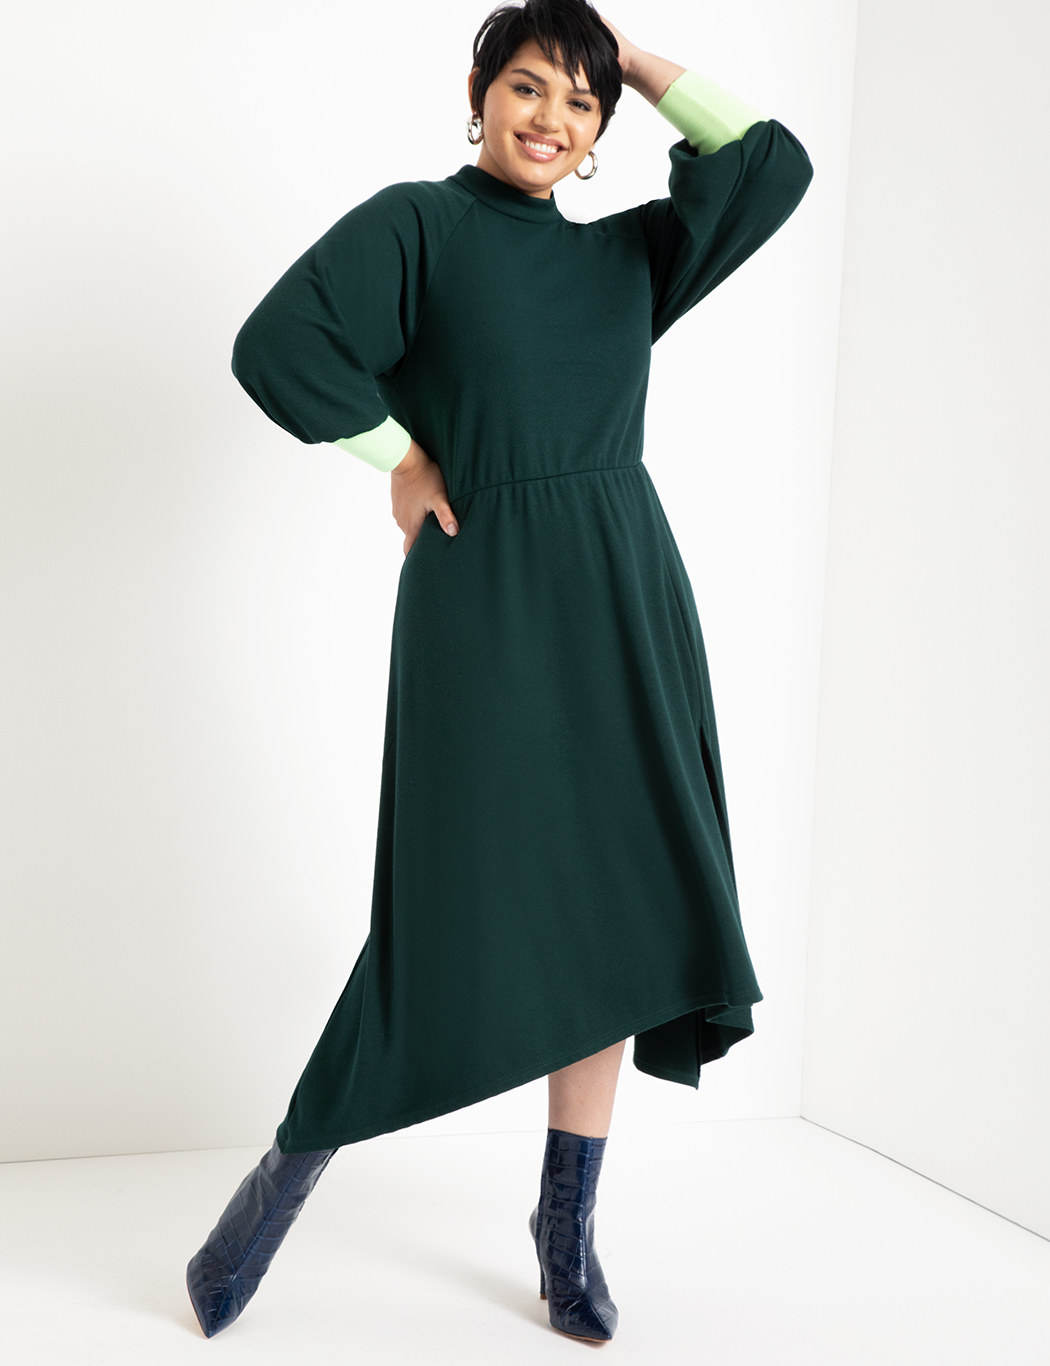 35 Winter Dresses Made To Keep You Warm ...